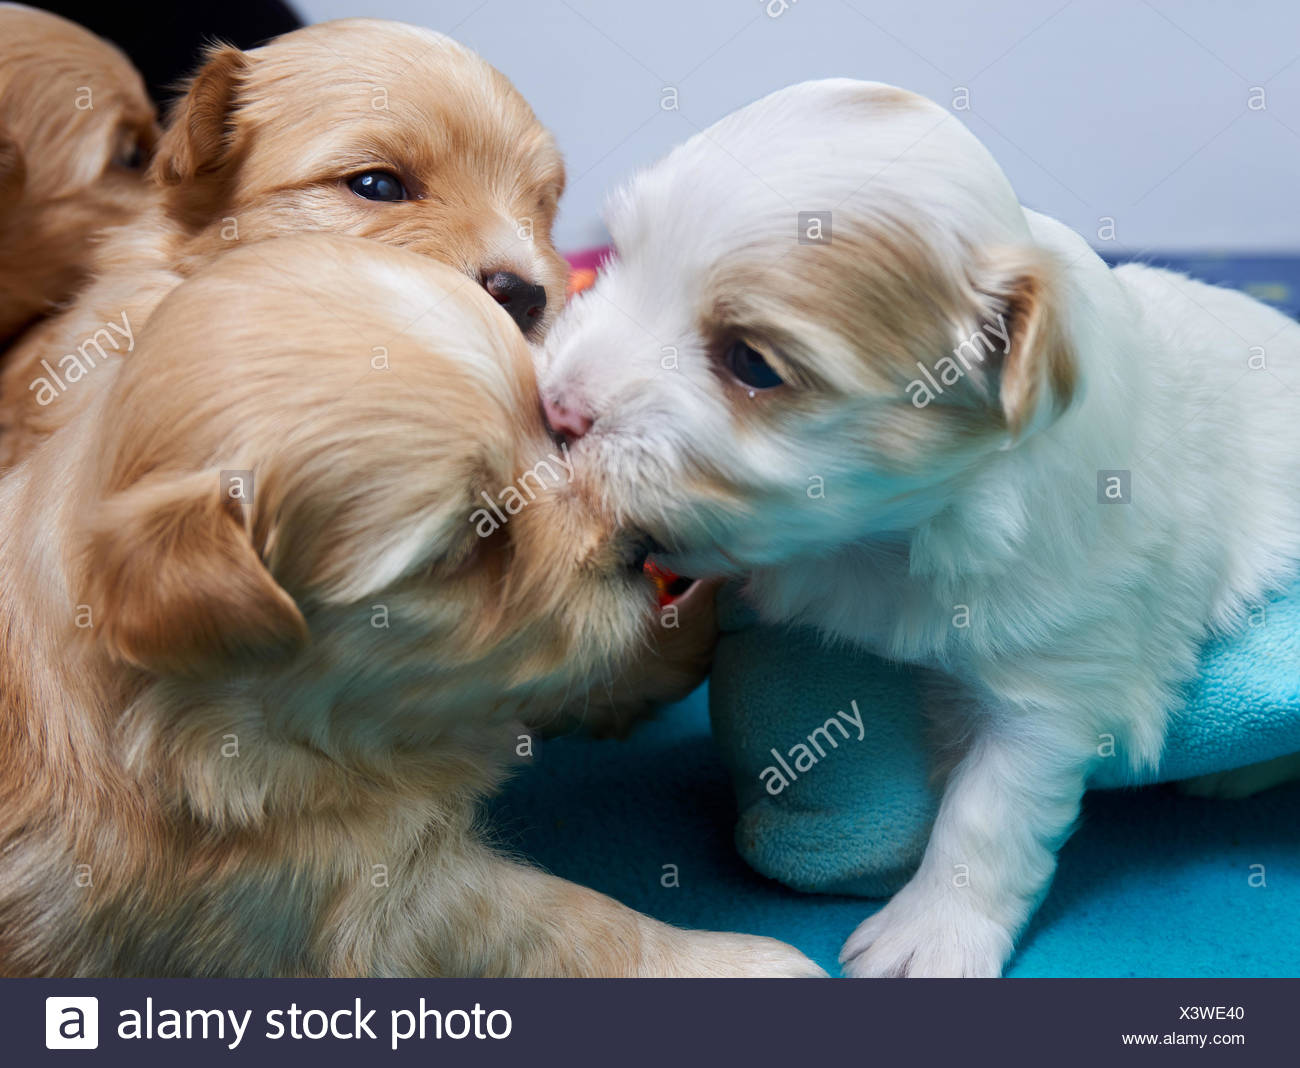 Two young havanese puppies play 